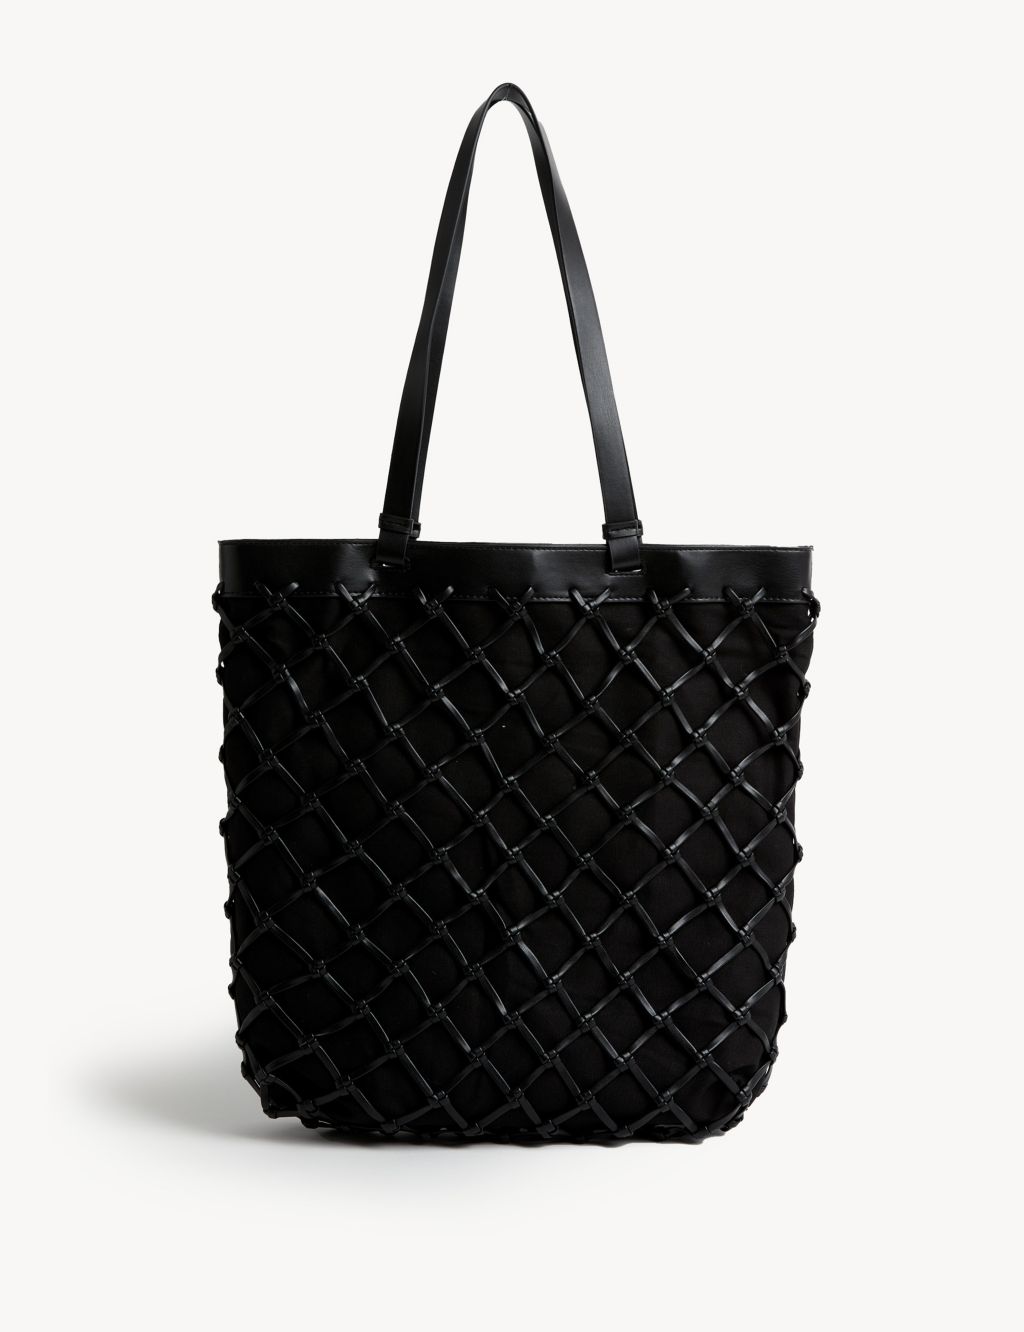 Woven Tote Bag | M&S Collection | M&S